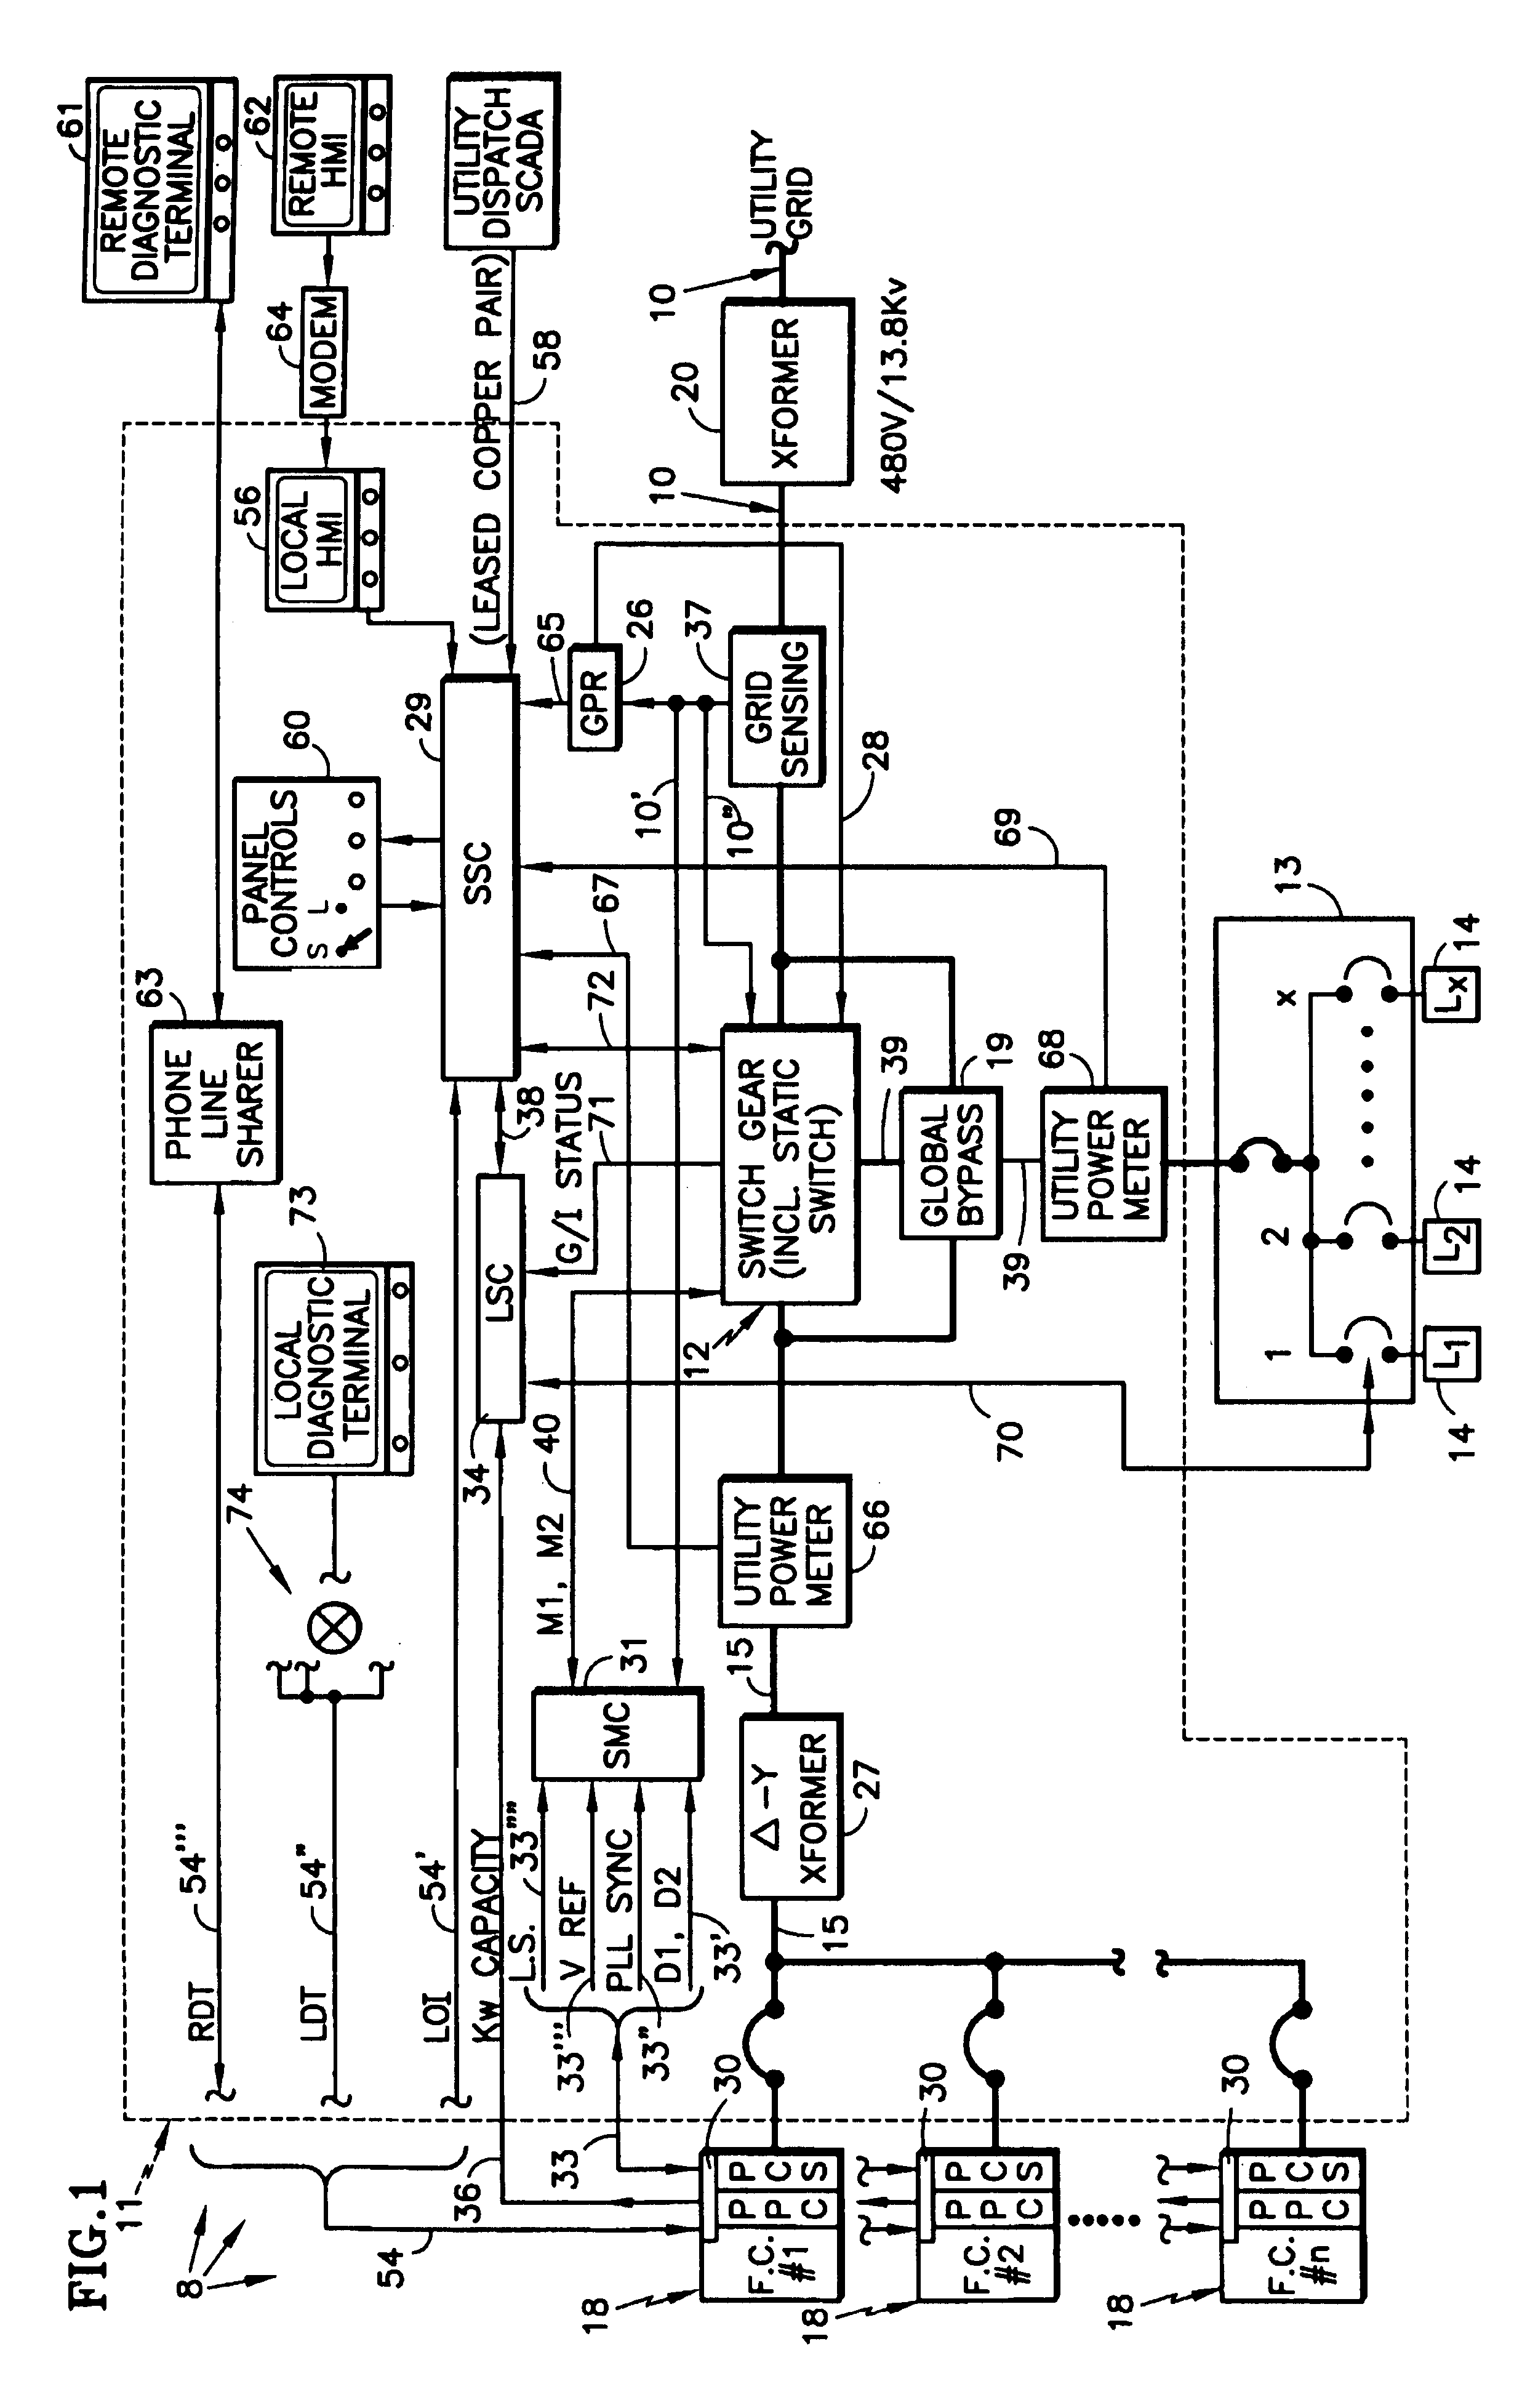 Control of multiple power plants at a site to provide a distributed resource in a utility grid